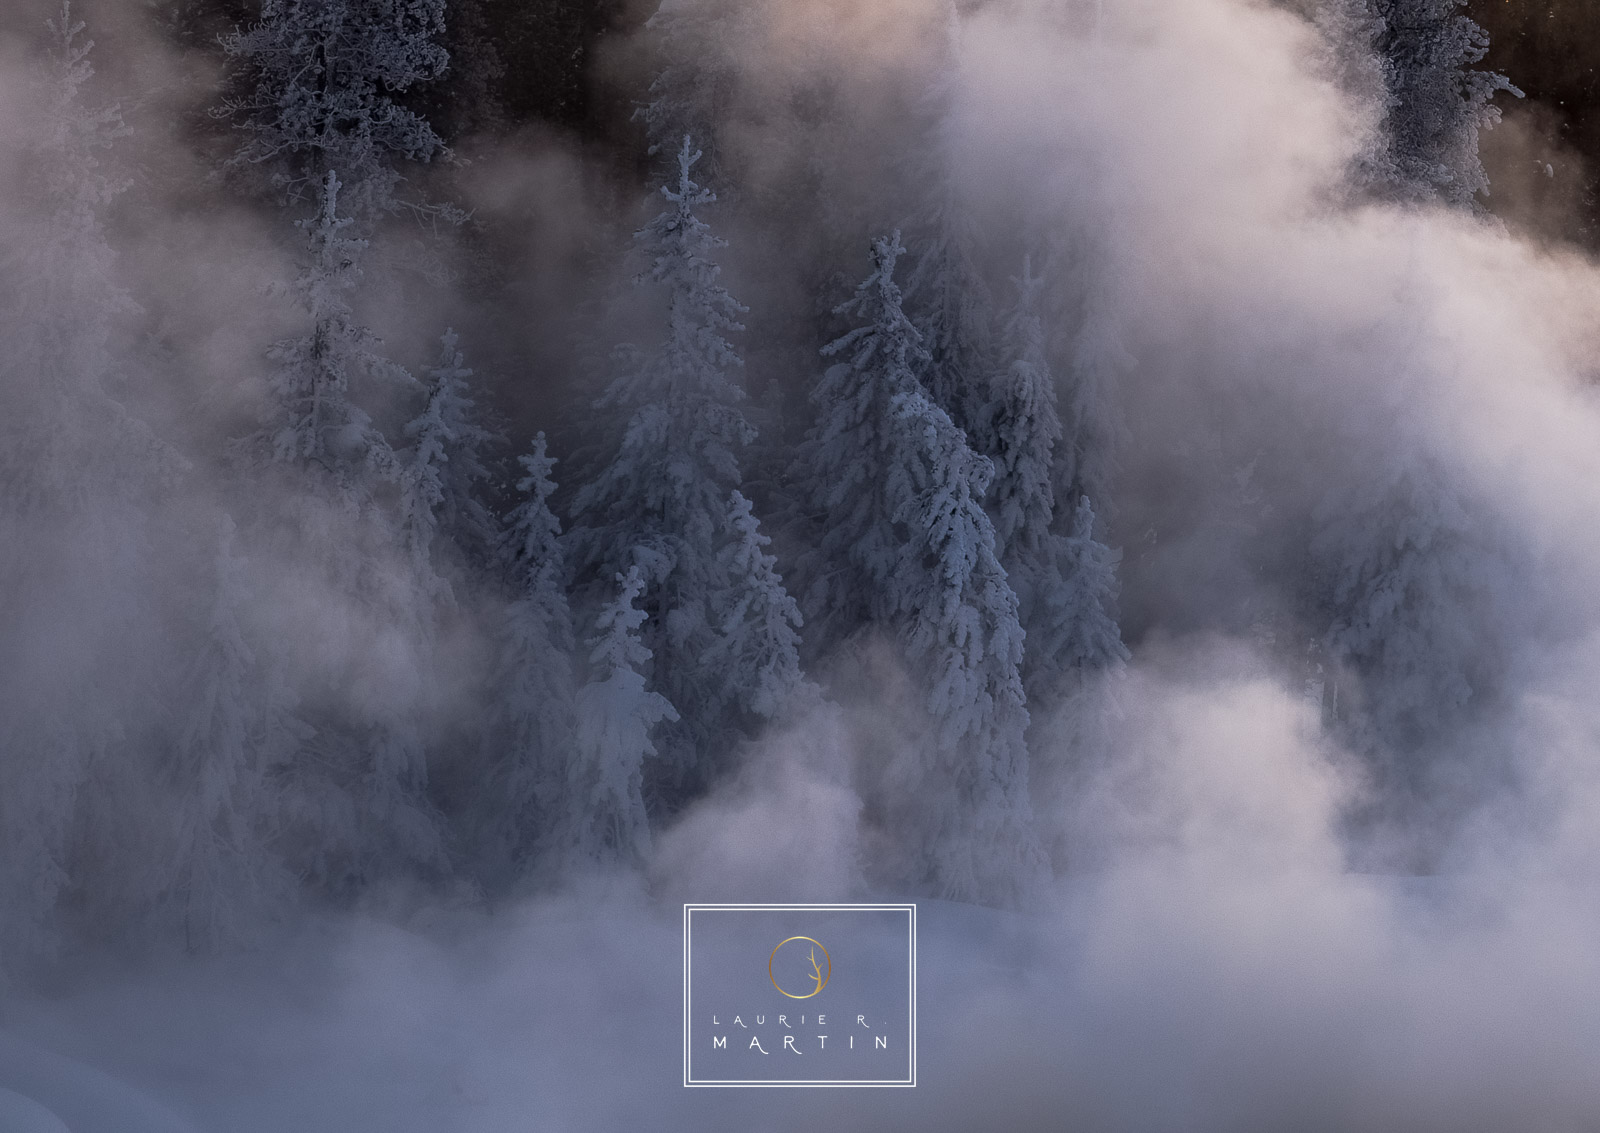 How many times do I stop and shoot fog and pine trees, this never gets old. The fog and steam sift in and out through the pines...